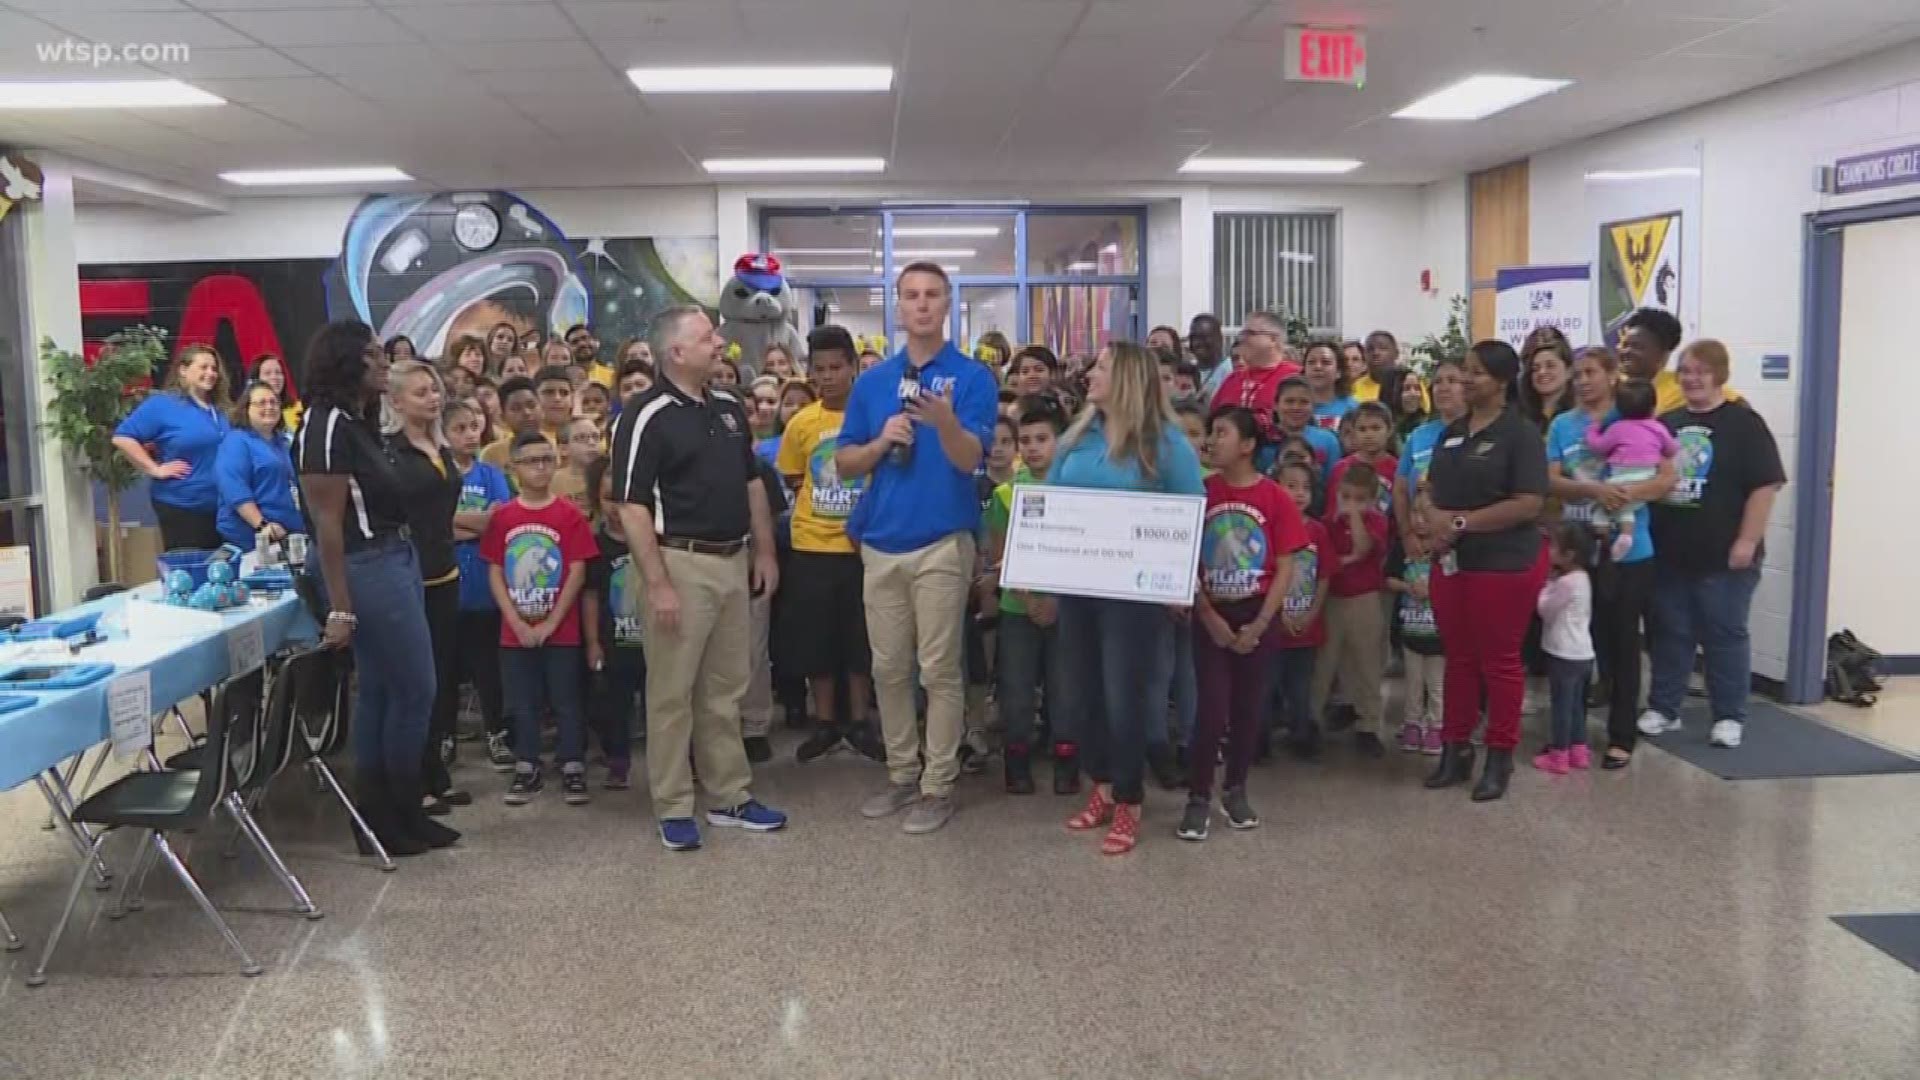 Duke Energy Florida is supporting our latest 10News School of the Week with a $1,000 check!